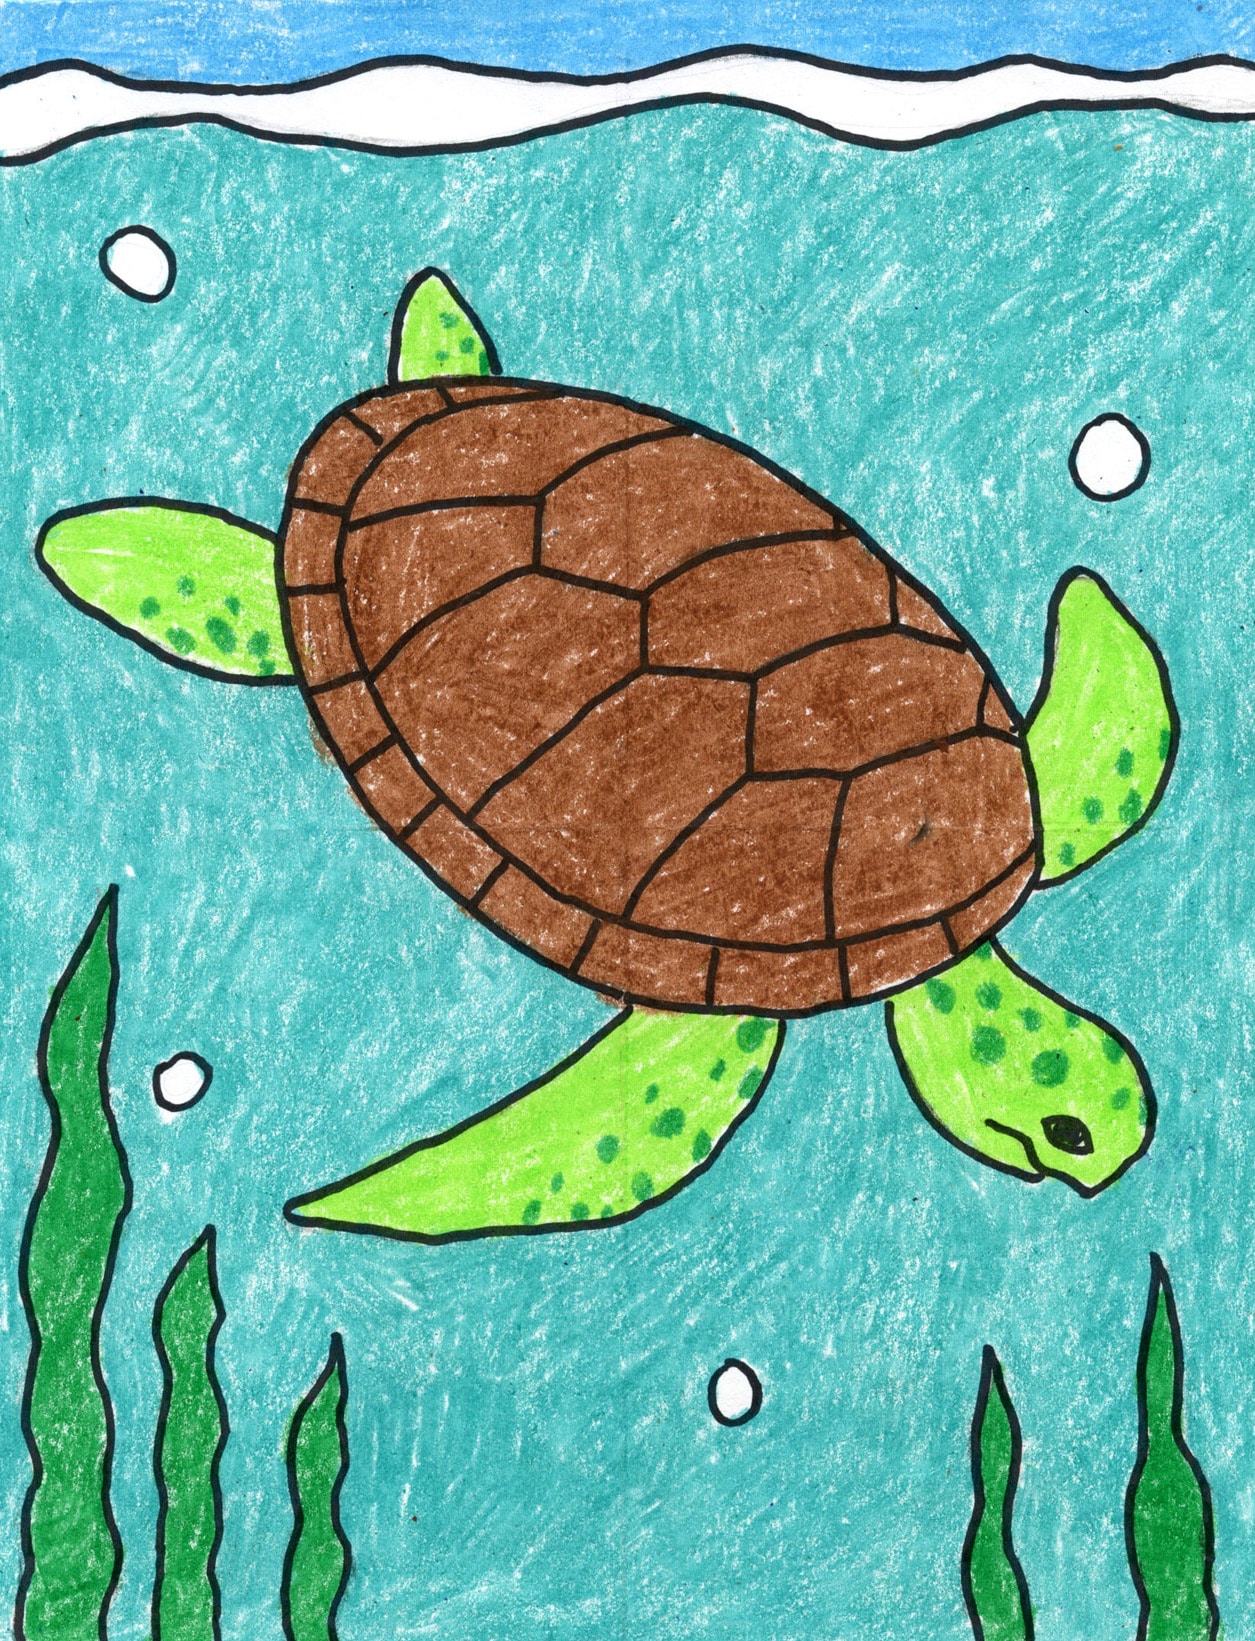 Drawing Of A Turtle With Colored Pencils Background, Turtle Pictures To Draw,  Animal, Cartoon Background Image And Wallpaper for Free Download